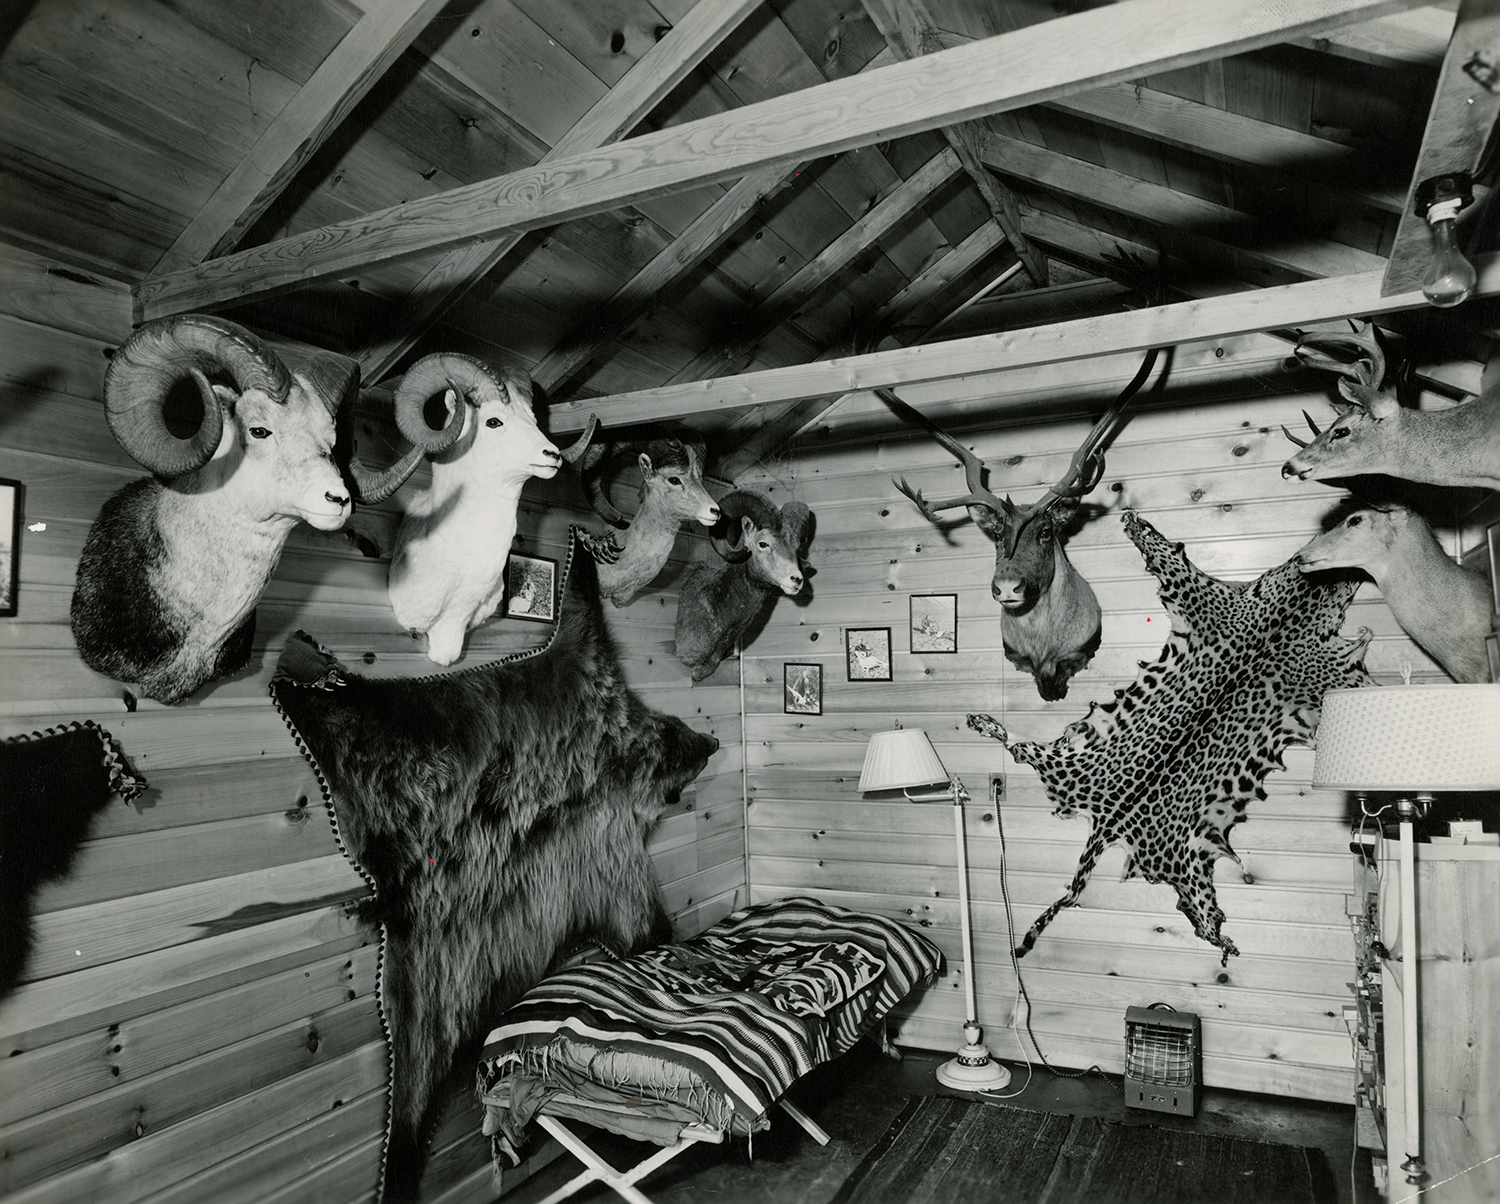 small wood-paneled room with animal heads and skins displayed on the walls